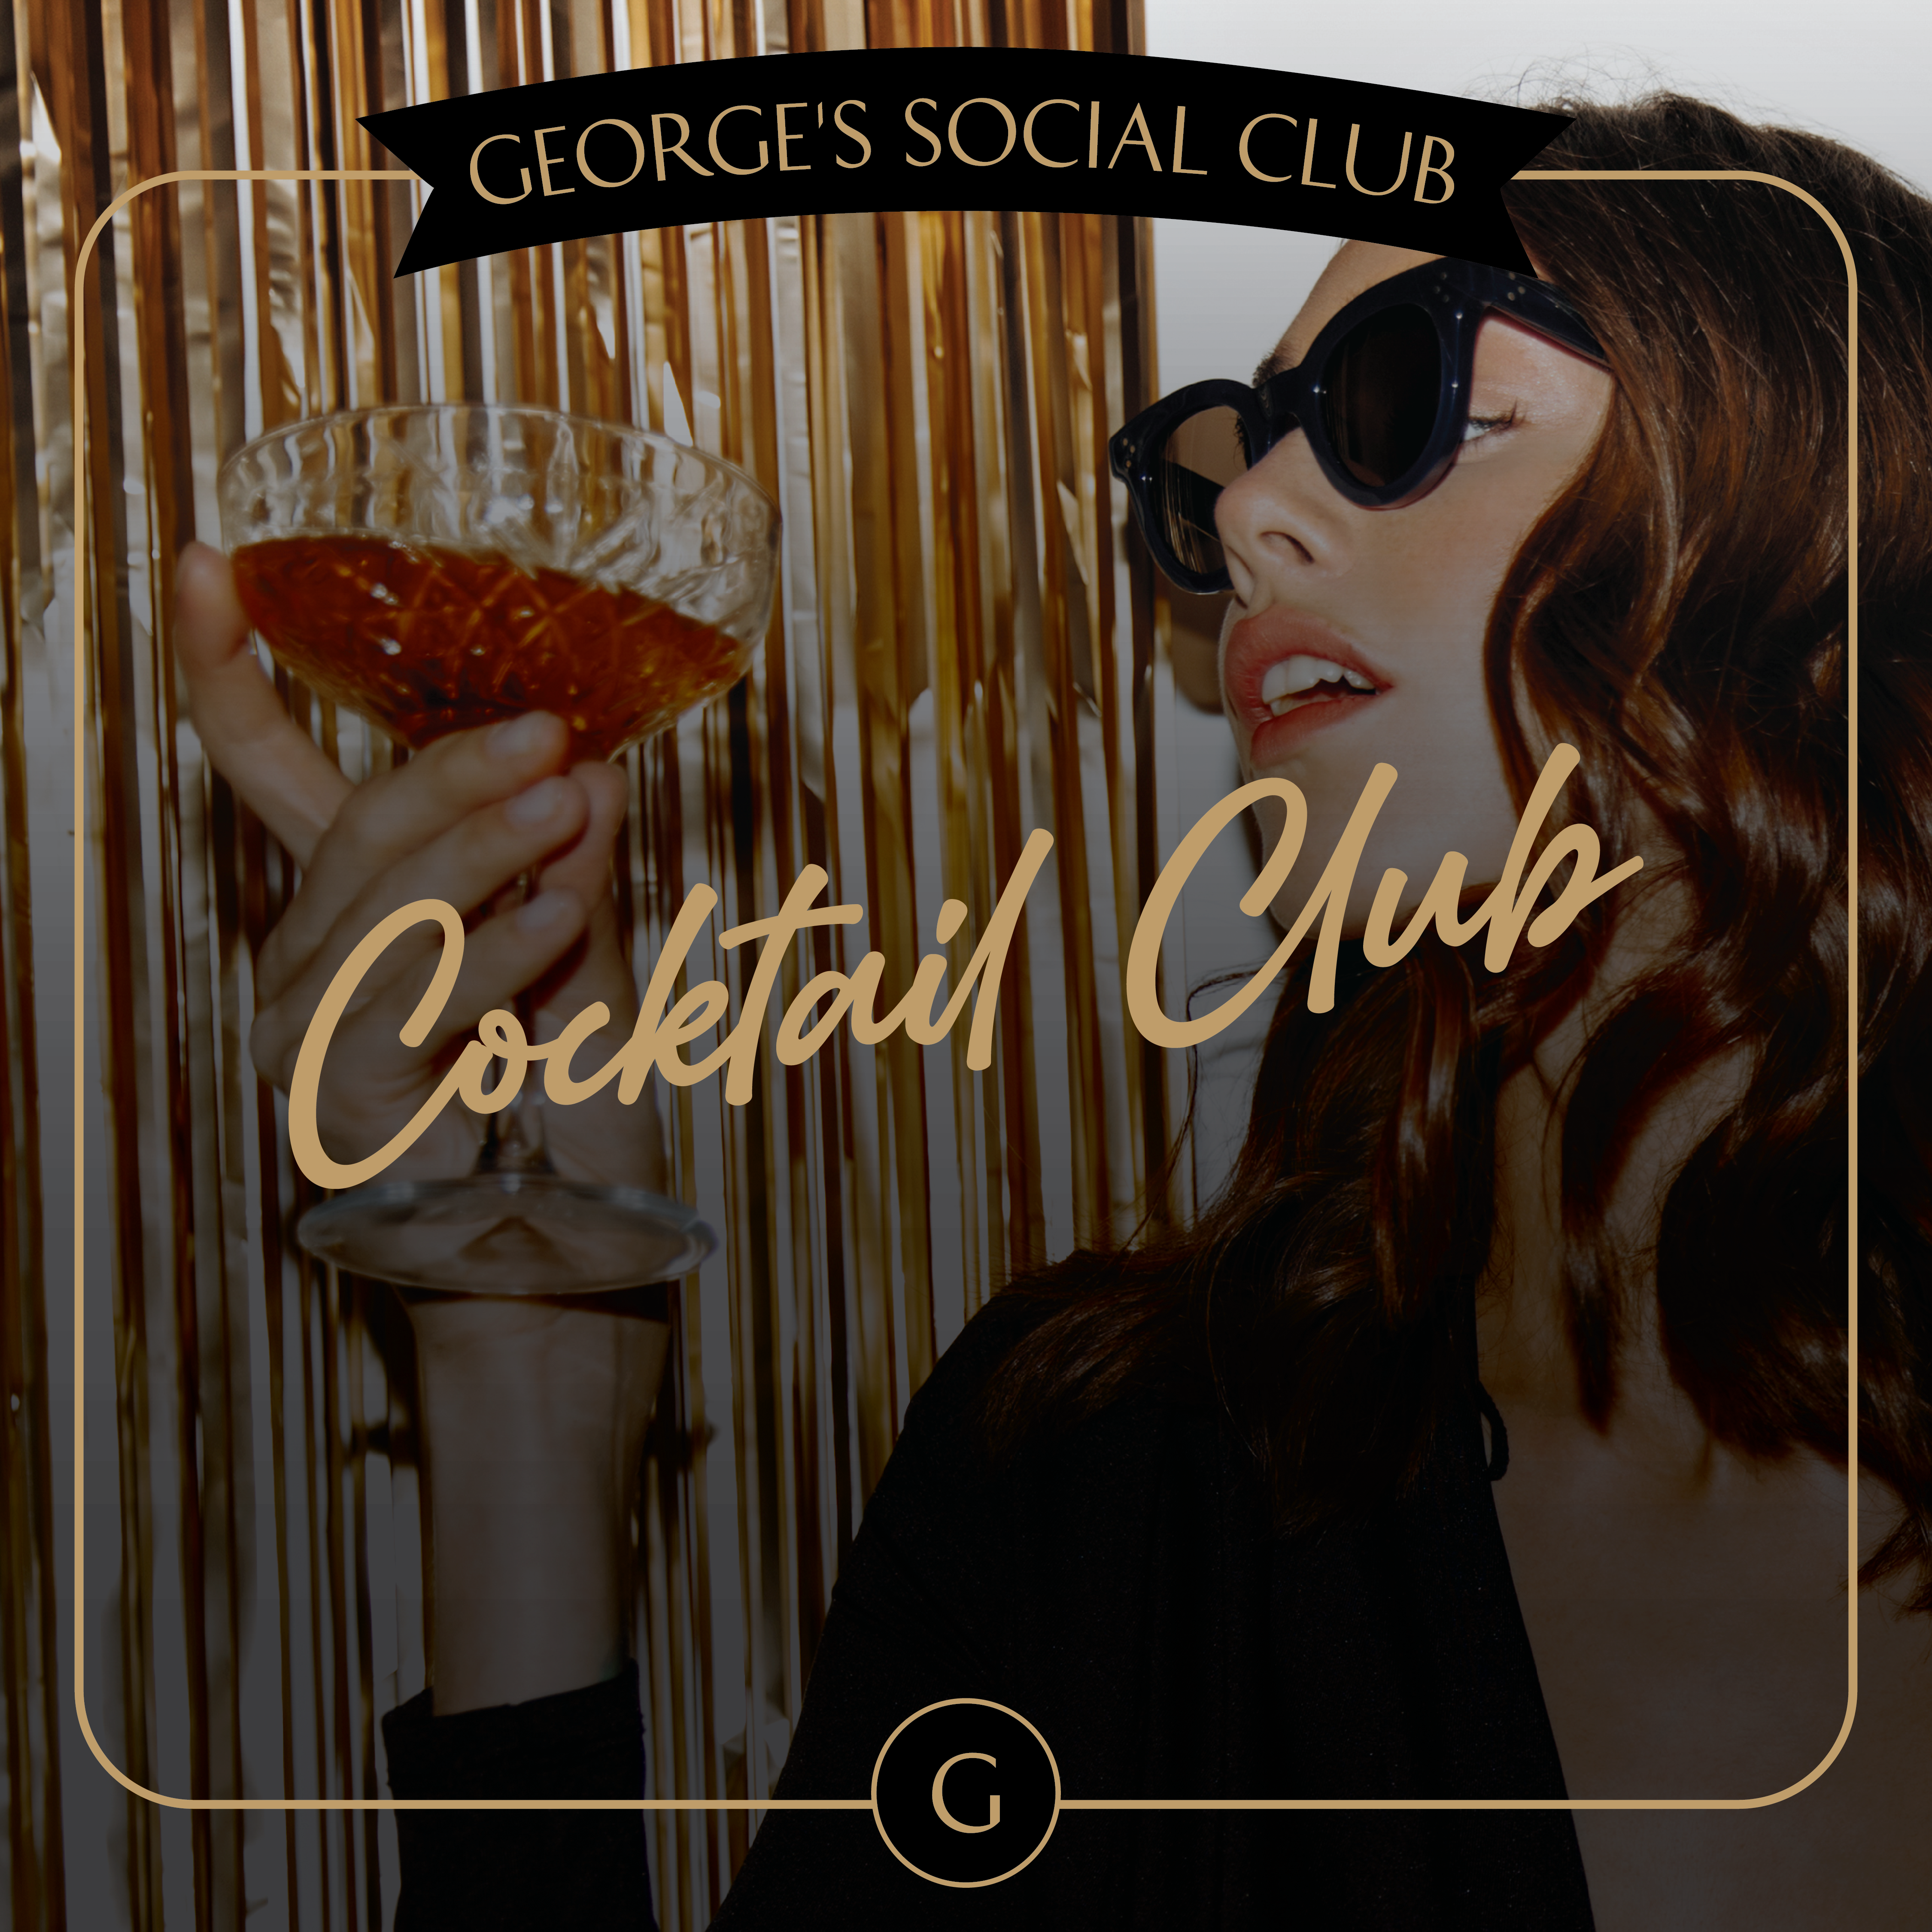 friends-toasting-at-the-george-on-collins-social-club